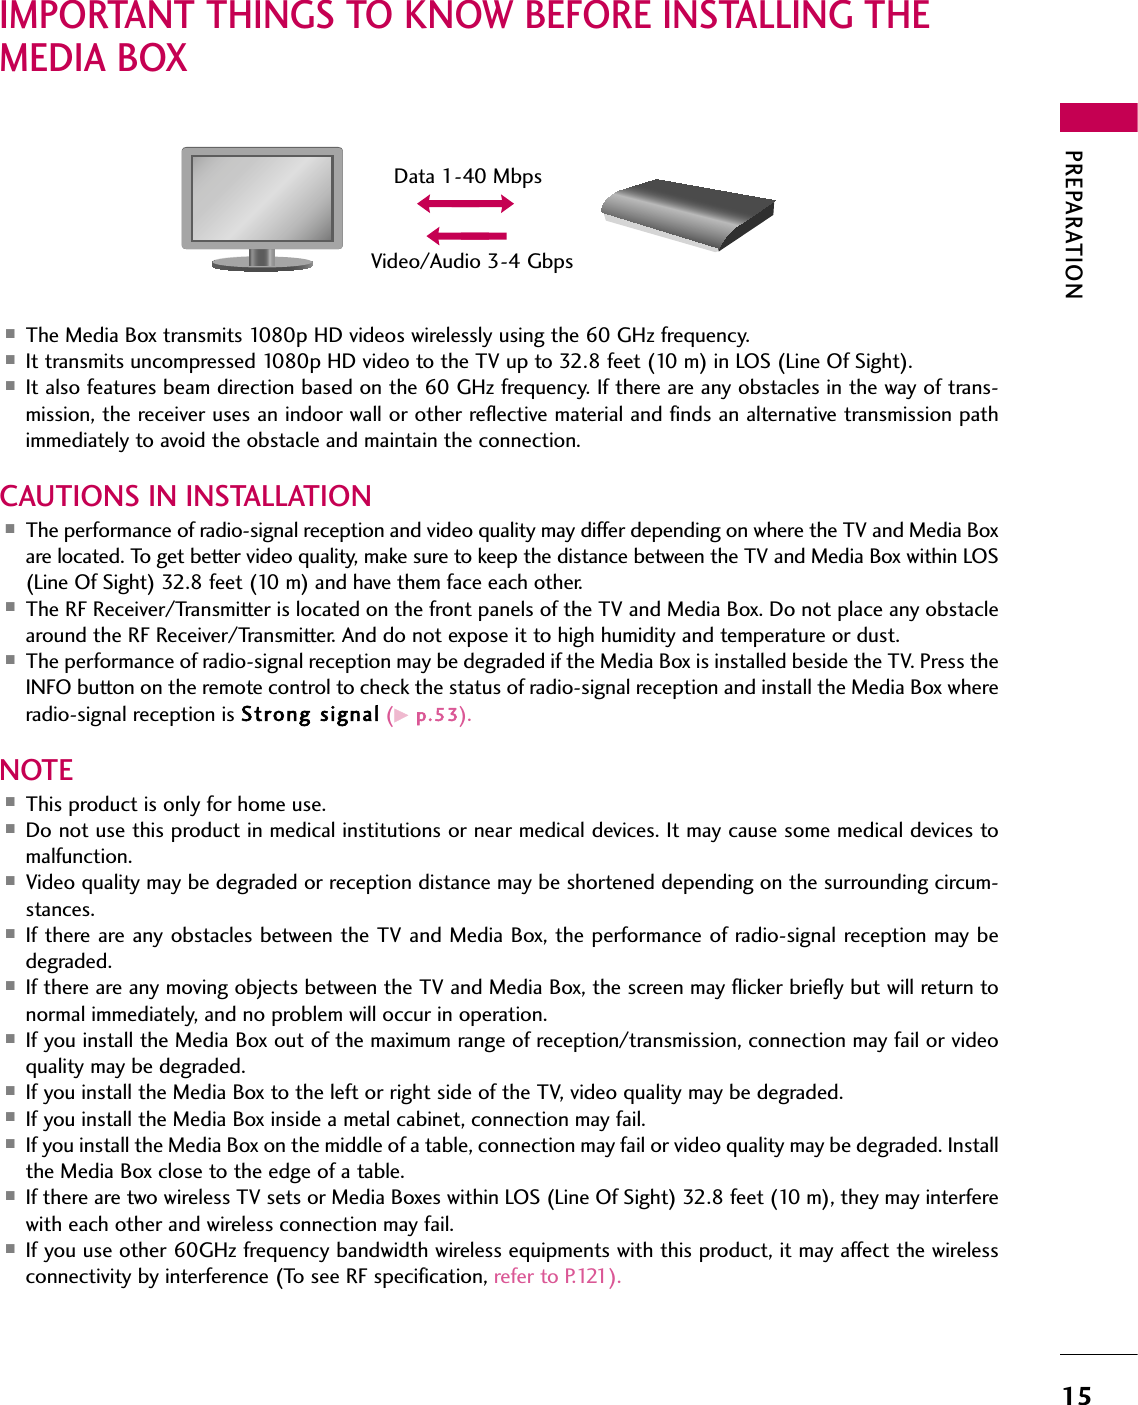 PREPARATION15IMPORTANT THINGS TO KNOW BEFORE INSTALLING THEMEDIA BOX ■The Media Box transmits 1080p HD videos wirelessly using the 60 GHz frequency.■It transmits uncompressed 1080p HD video to the TV up to 32.8 feet (10 m) in LOS (Line Of Sight).■It also features beam direction based on the 60 GHz frequency. If there are any obstacles in the way of trans-mission, the receiver uses an indoor wall or other reflective material and finds an alternative transmission pathimmediately to avoid the obstacle and maintain the connection.CAUTIONS IN INSTALLATION■The performance of radio-signal reception and video quality may differ depending on where the TV and Media Boxare located. To get better video quality, make sure to keep the distance between the TV and Media Box within LOS(Line Of Sight) 32.8 feet (10 m) and have them face each other.■The RF Receiver/Transmitter is located on the front panels of the TV and Media Box. Do not place any obstaclearound the RF Receiver/Transmitter. And do not expose it to high humidity and temperature or dust.■The performance of radio-signal reception may be degraded if the Media Box is installed beside the TV. Press theINFO button on the remote control to check the status of radio-signal reception and install the Media Box whereradio-signal reception is Strong  signal (Gp.5 3).NOTE■This product is only for home use.■Do not use this product in medical institutions or near medical devices. It may cause some medical devices tomalfunction.■Video quality may be degraded or reception distance may be shortened depending on the surrounding circum-stances.■If there are any obstacles between the TV and Media Box, the performance of radio-signal reception may bedegraded.■If there are any moving objects between the TV and Media Box, the screen may flicker briefly but will return tonormal immediately, and no problem will occur in operation.■If you install the Media Box out of the maximum range of reception/transmission, connection may fail or videoquality may be degraded.■If you install the Media Box to the left or right side of the TV, video quality may be degraded.■If you install the Media Box inside a metal cabinet, connection may fail.■If you install the Media Box on the middle of a table, connection may fail or video quality may be degraded. Installthe Media Box close to the edge of a table.■If there are two wireless TV sets or Media Boxes within LOS (Line Of Sight) 32.8 feet (10 m), they may interferewith each other and wireless connection may fail.■If you use other 60GHz frequency bandwidth wireless equipments with this product, it may affect the wirelessconnectivity by interference (To see RF specification, refer to P.121).Data 1-40 MbpsVideo/Audio 3-4 Gbps